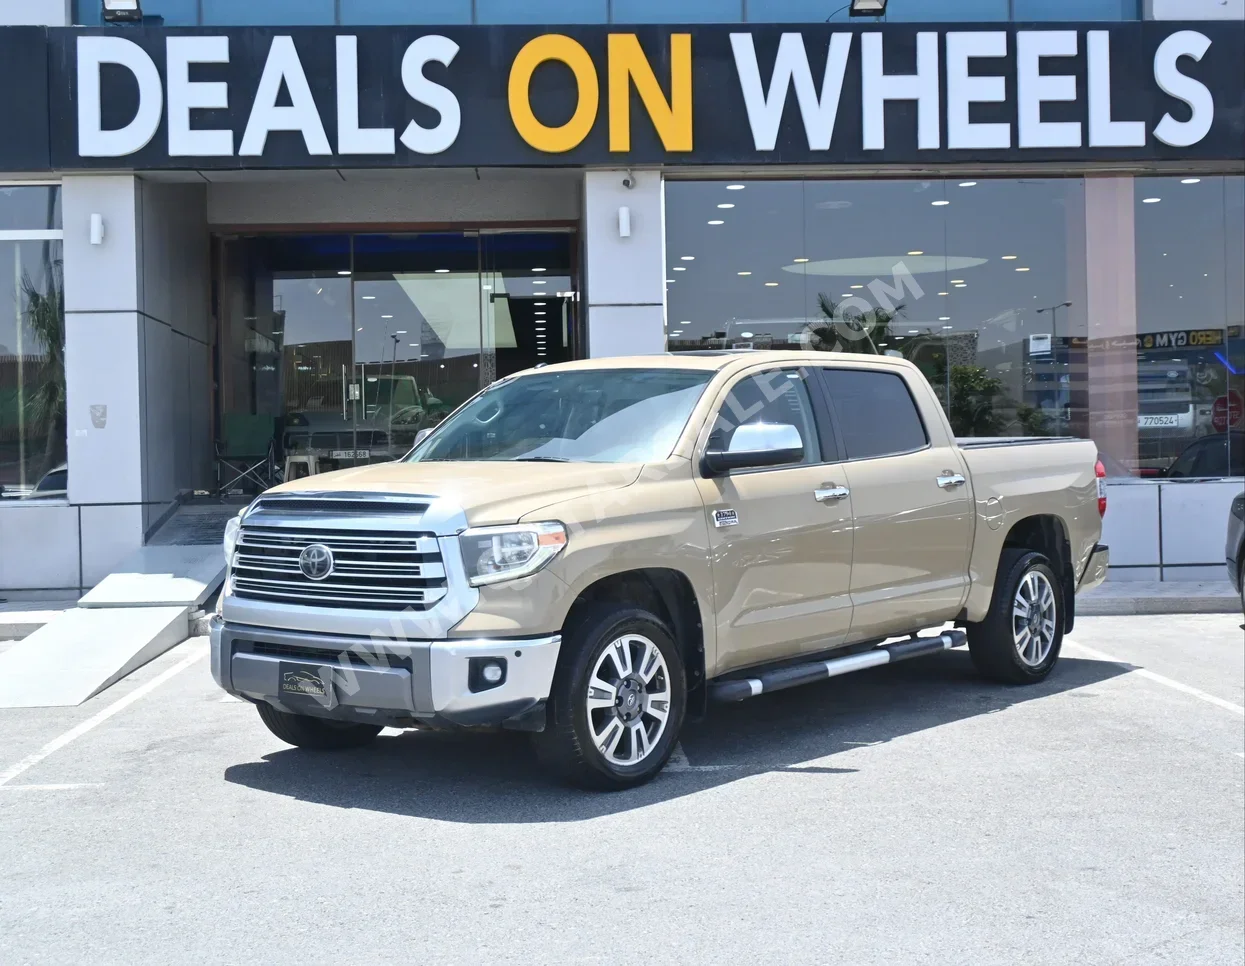 Toyota  Tundra  Edition 1794  2018  Automatic  292,800 Km  8 Cylinder  Four Wheel Drive (4WD)  Pick Up  Beige